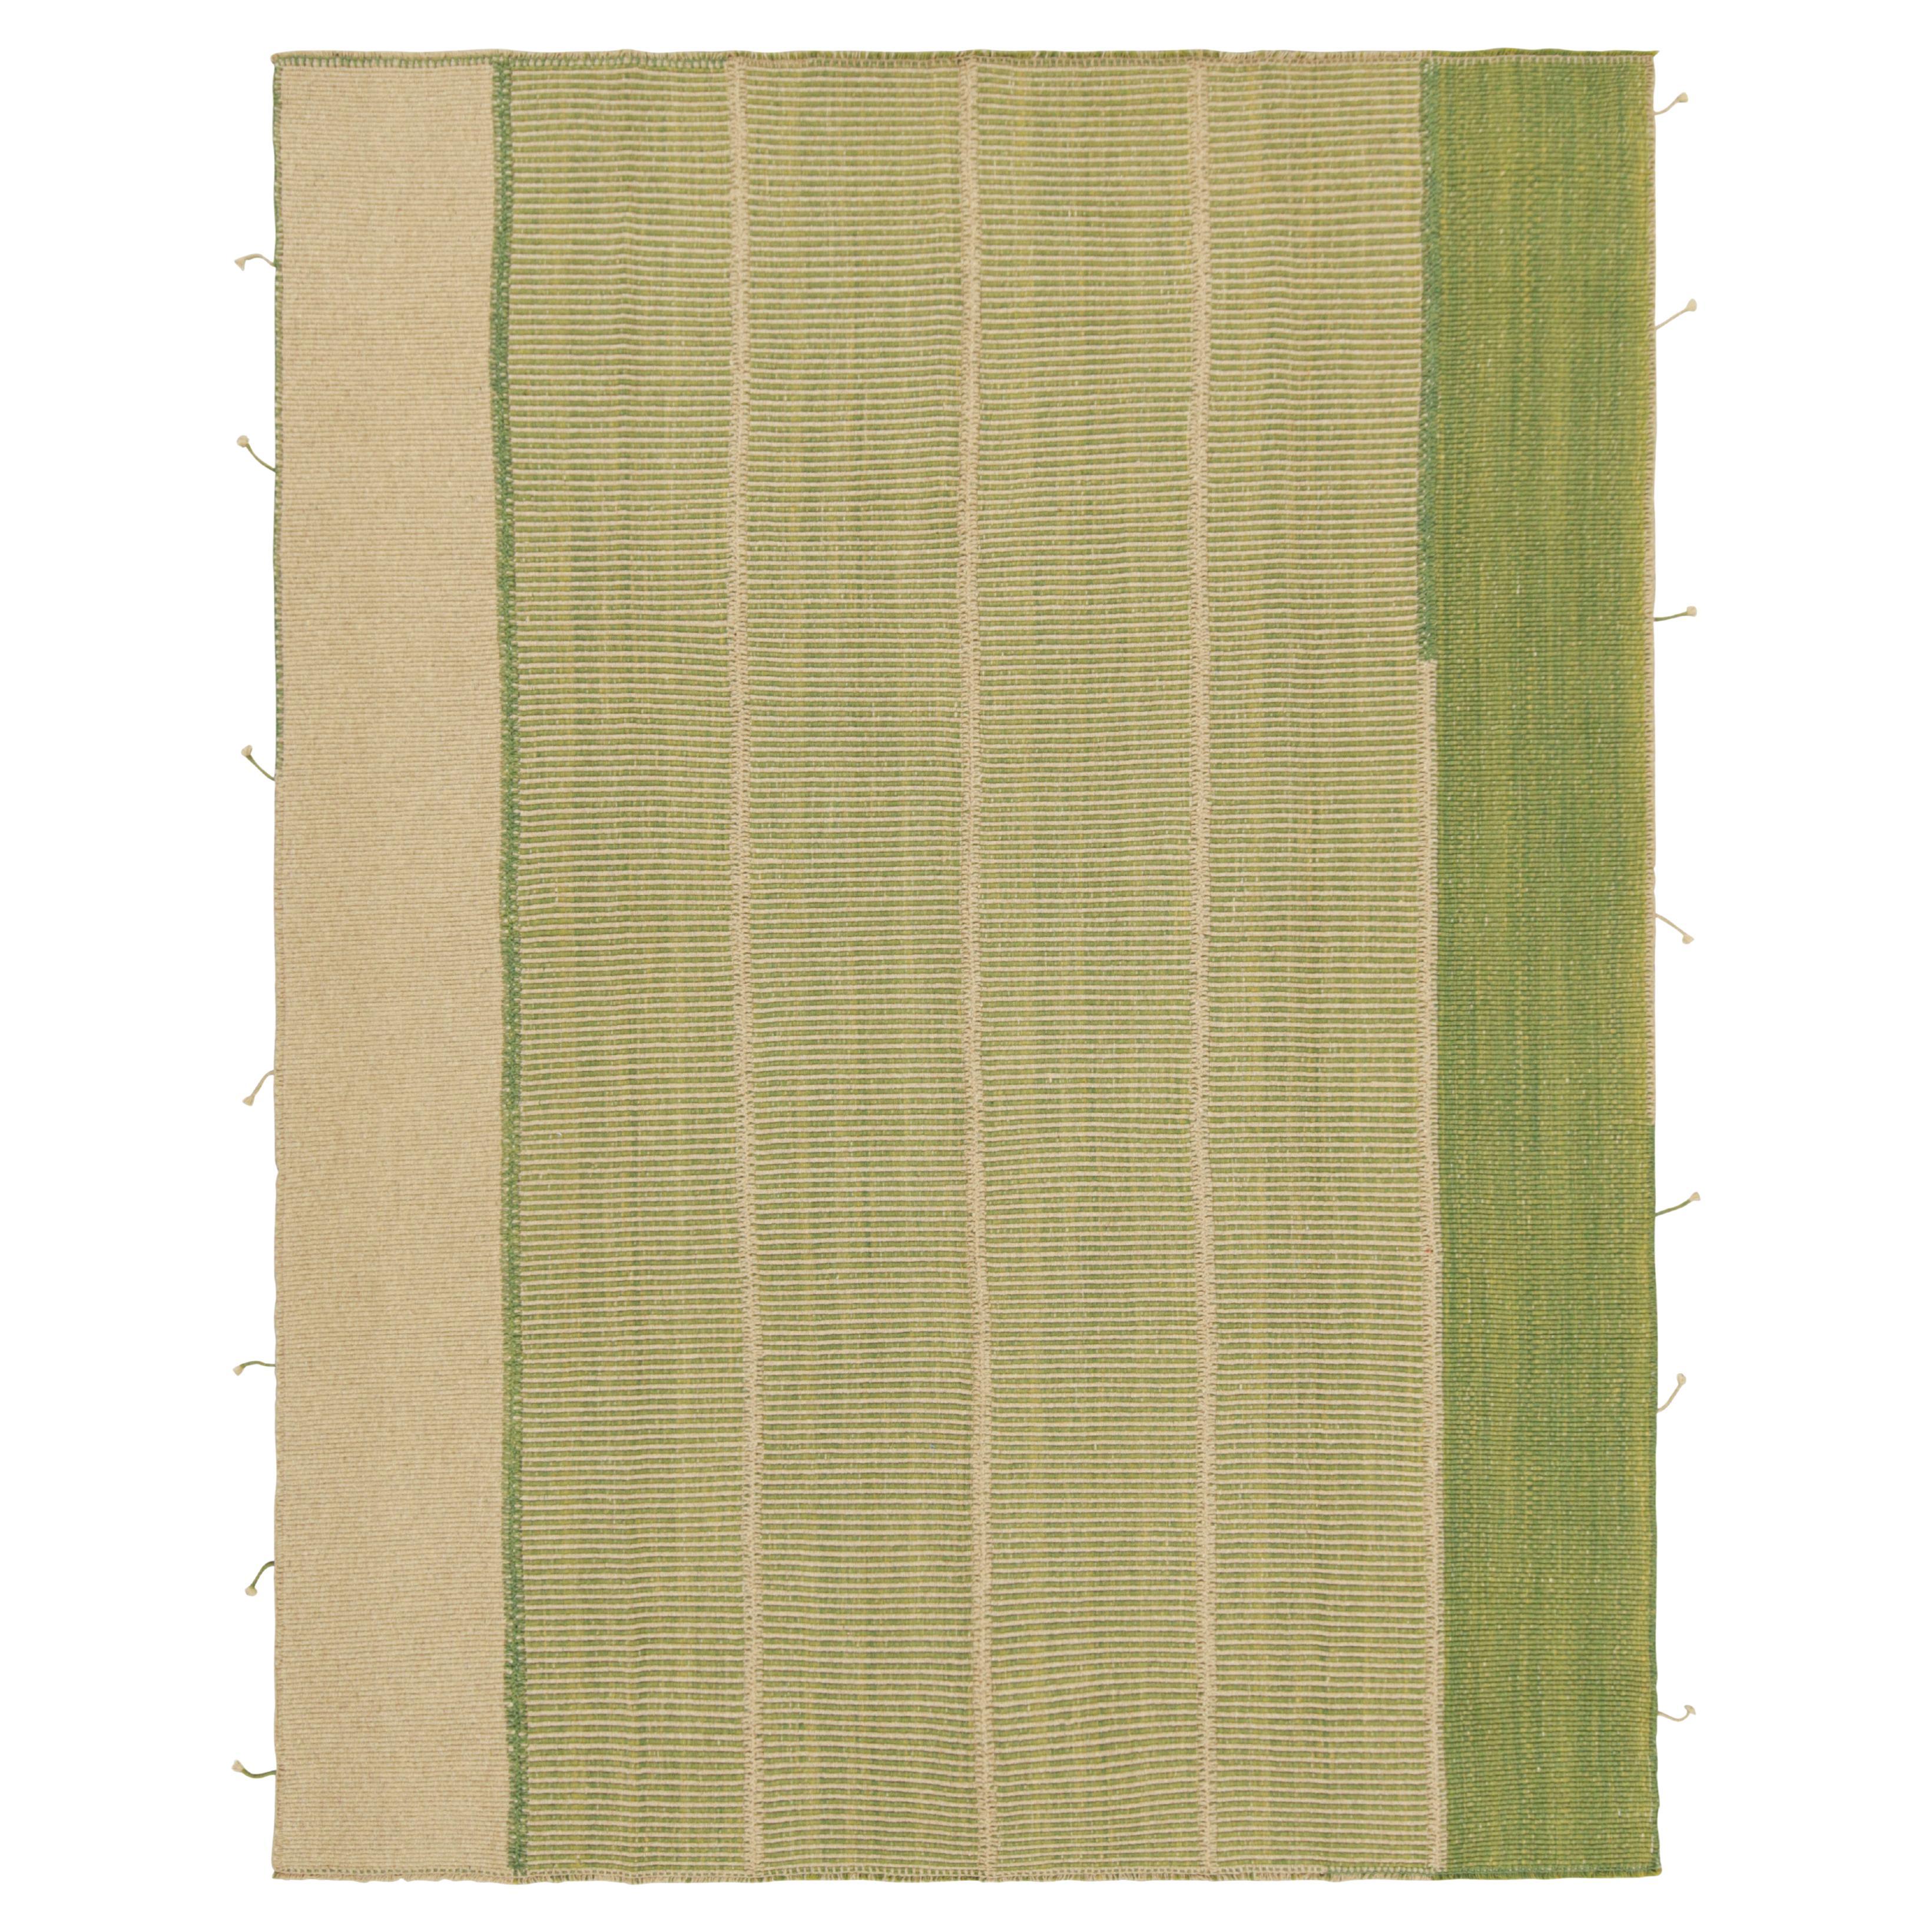 Rug & Kilim’s Contemporary Kilim in Beige and Green Textural Stripes For Sale